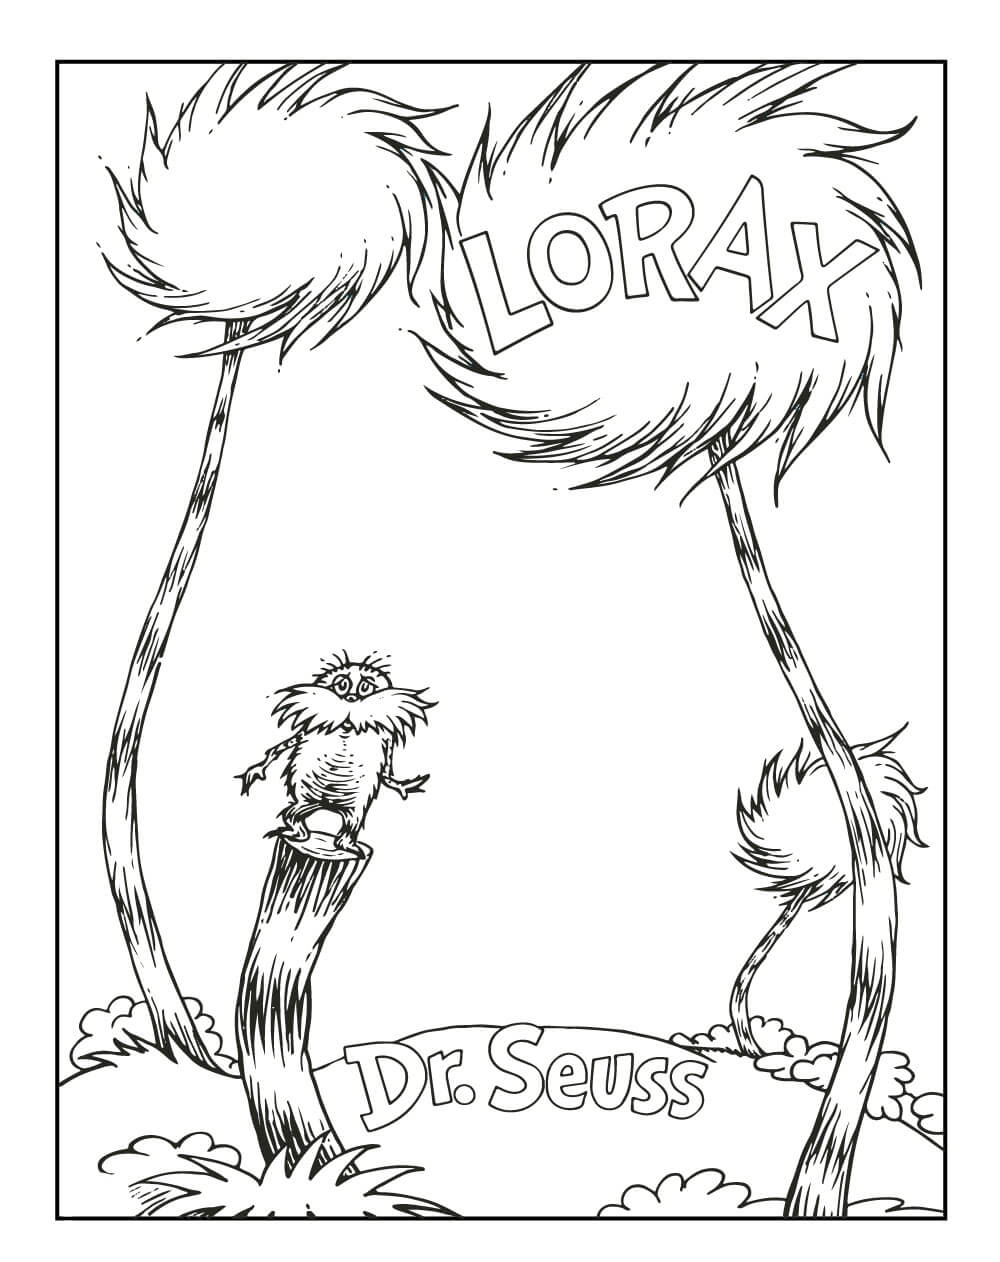 Little Lorax Coloring Page Free Printable Coloring Pages for Kids